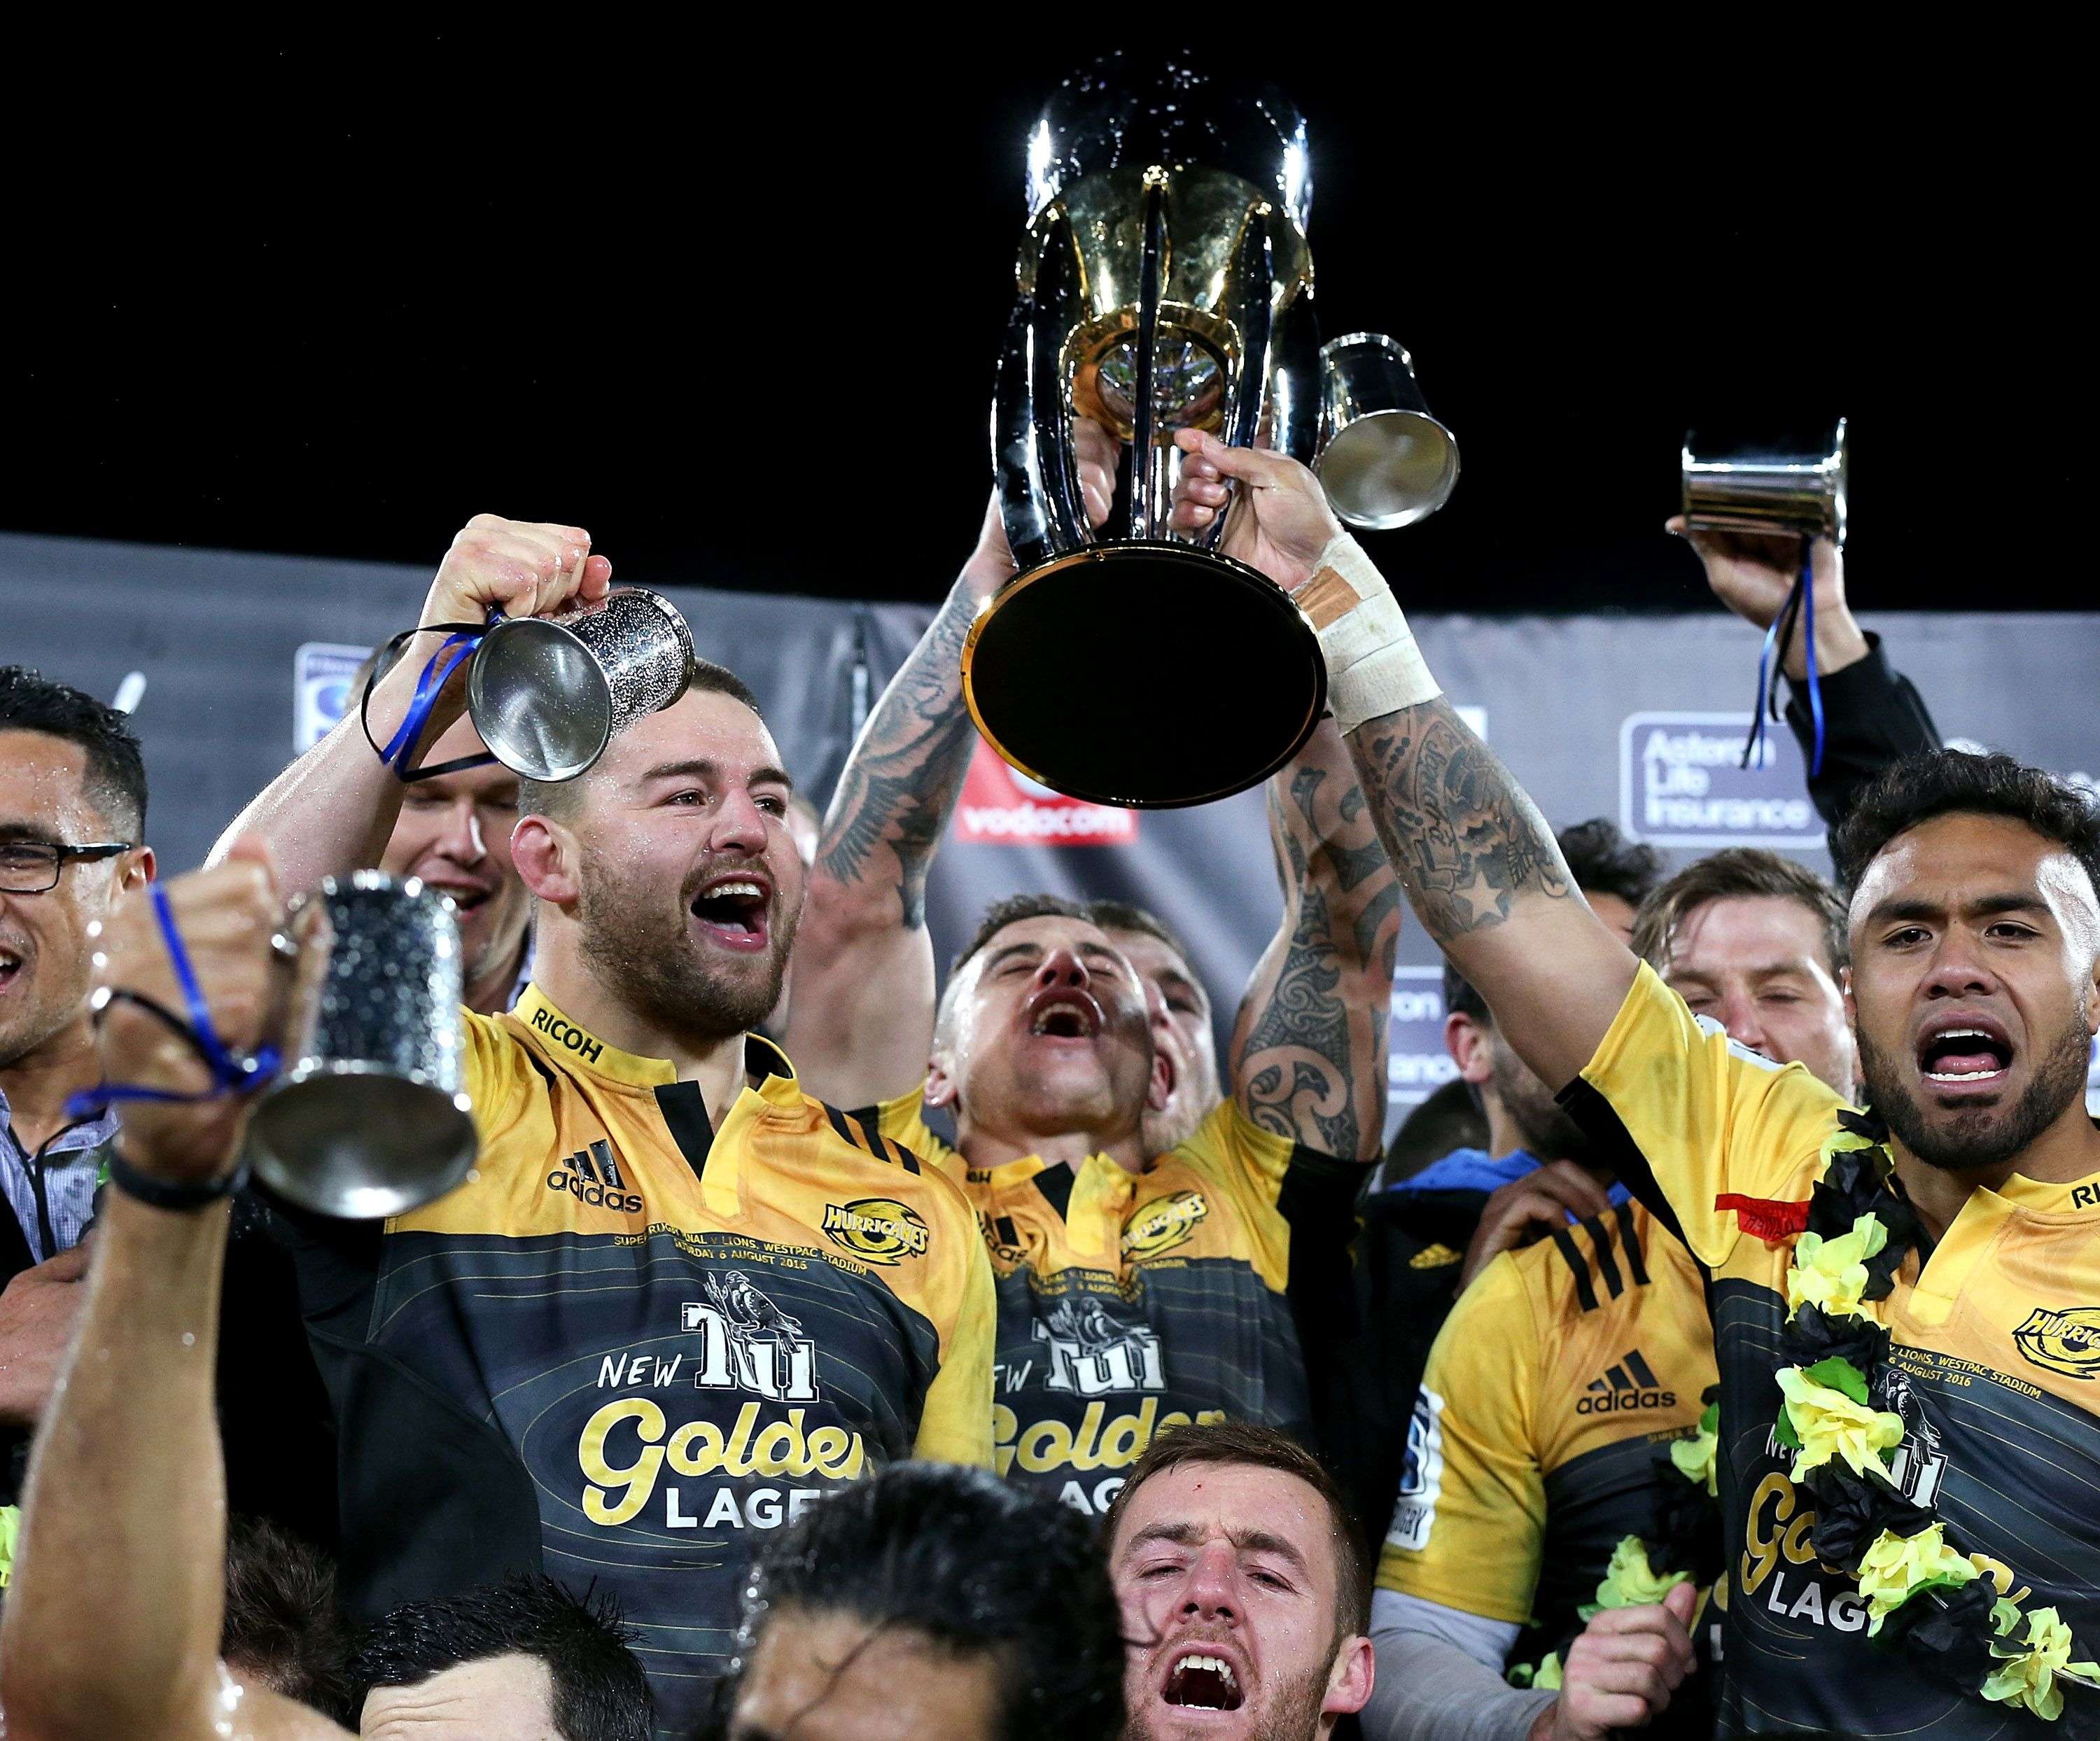 Captain Dane Coles (left) and Hurricanes teammates celebrate with the trophy after winning the Super Rugby final against the Golden Lions. Photo: AFP